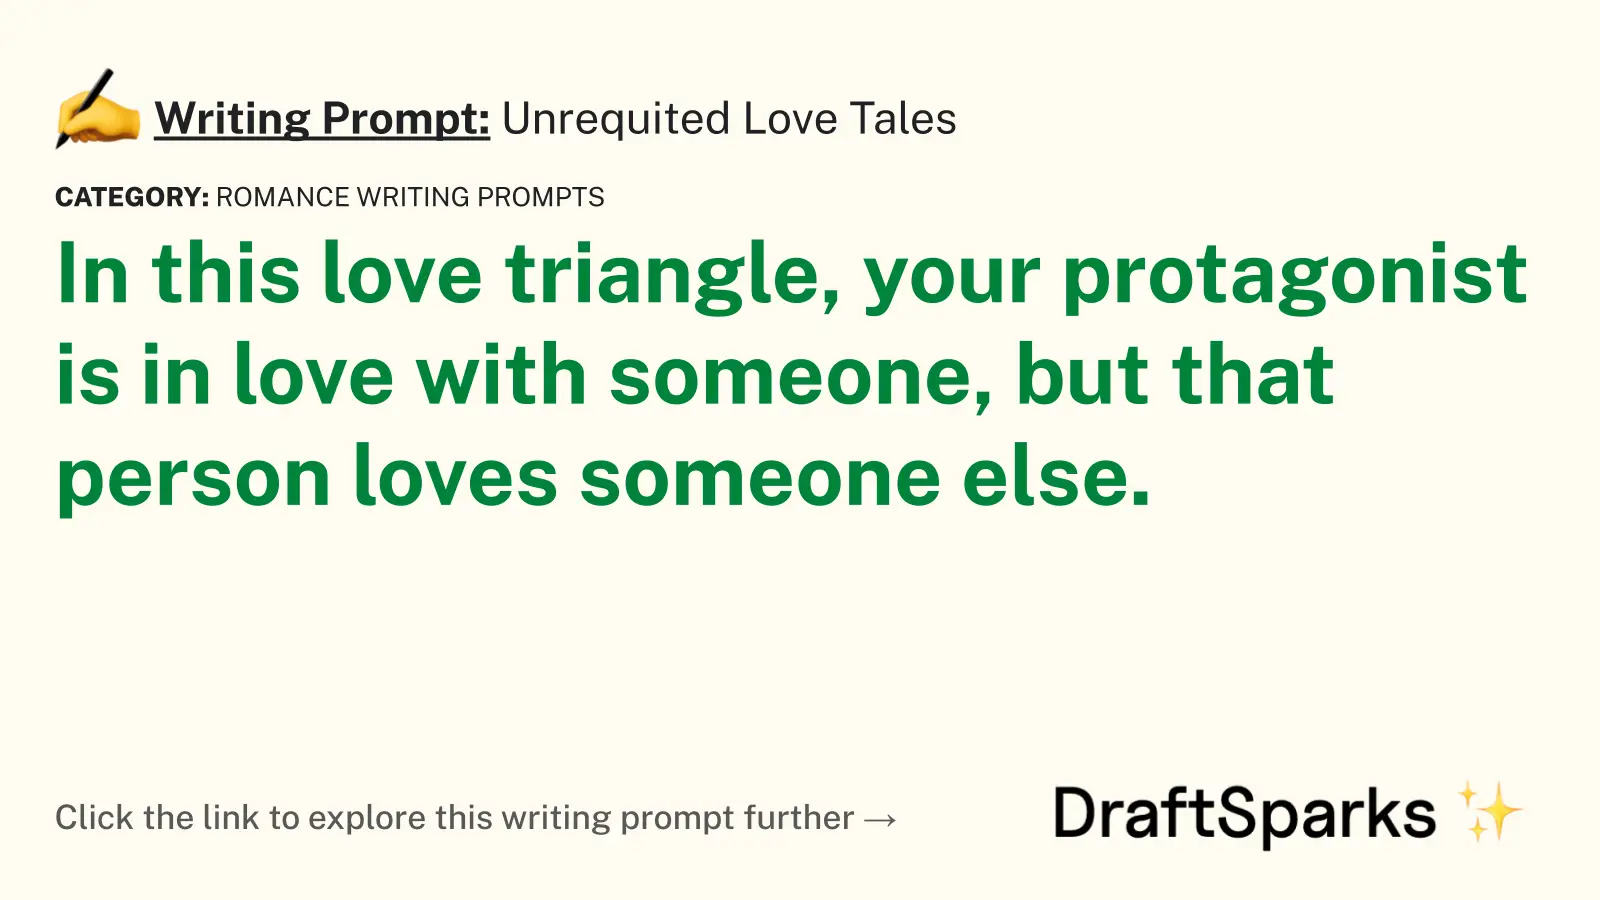 Unrequited Love Tales